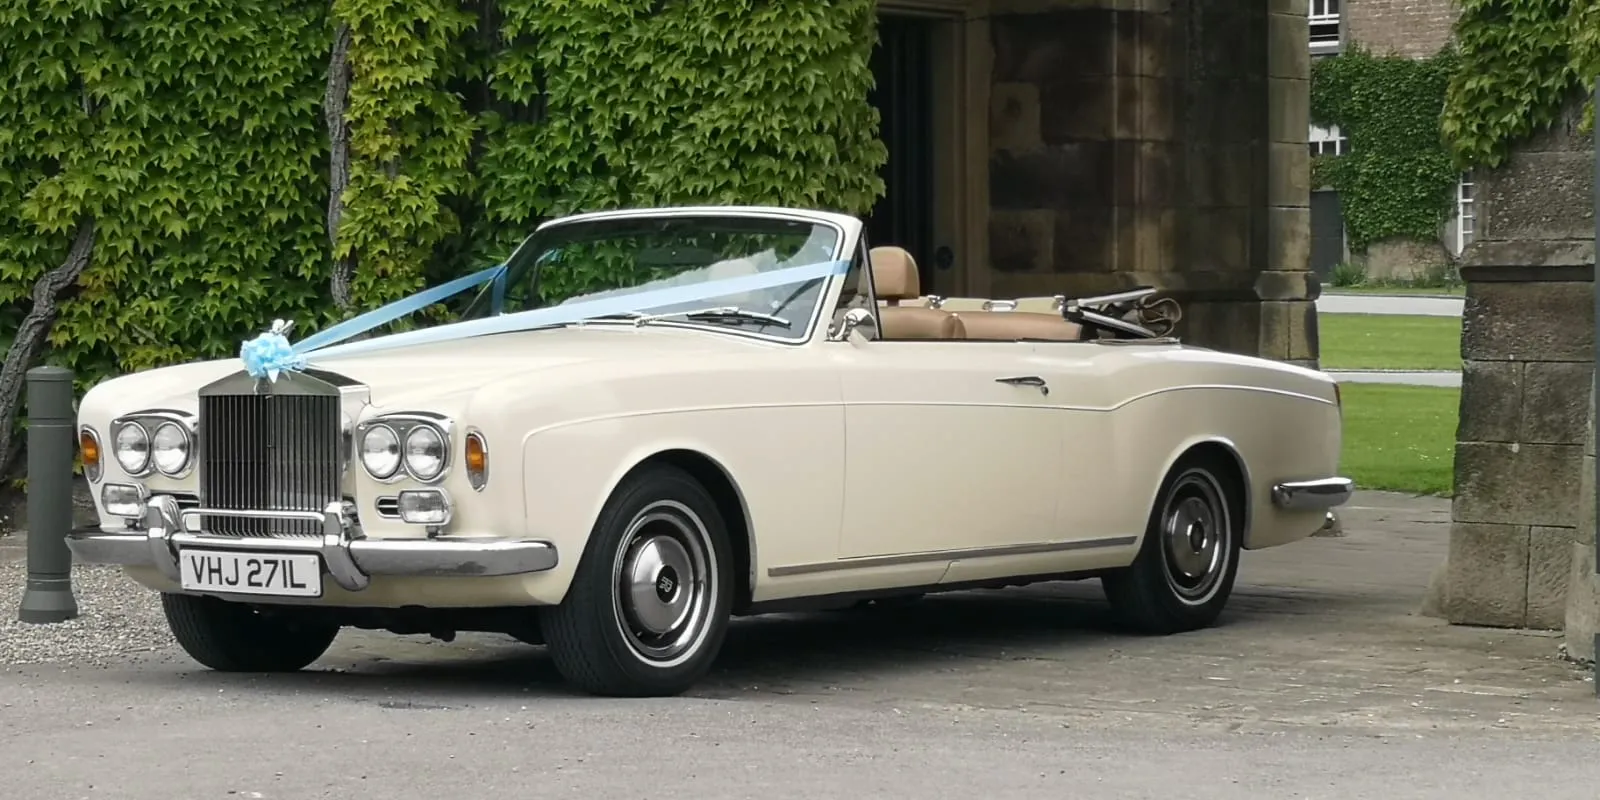 Ivory Classic Rolls-Royce Corniche with roof down and dressed with white ribbons entering the wedding venue